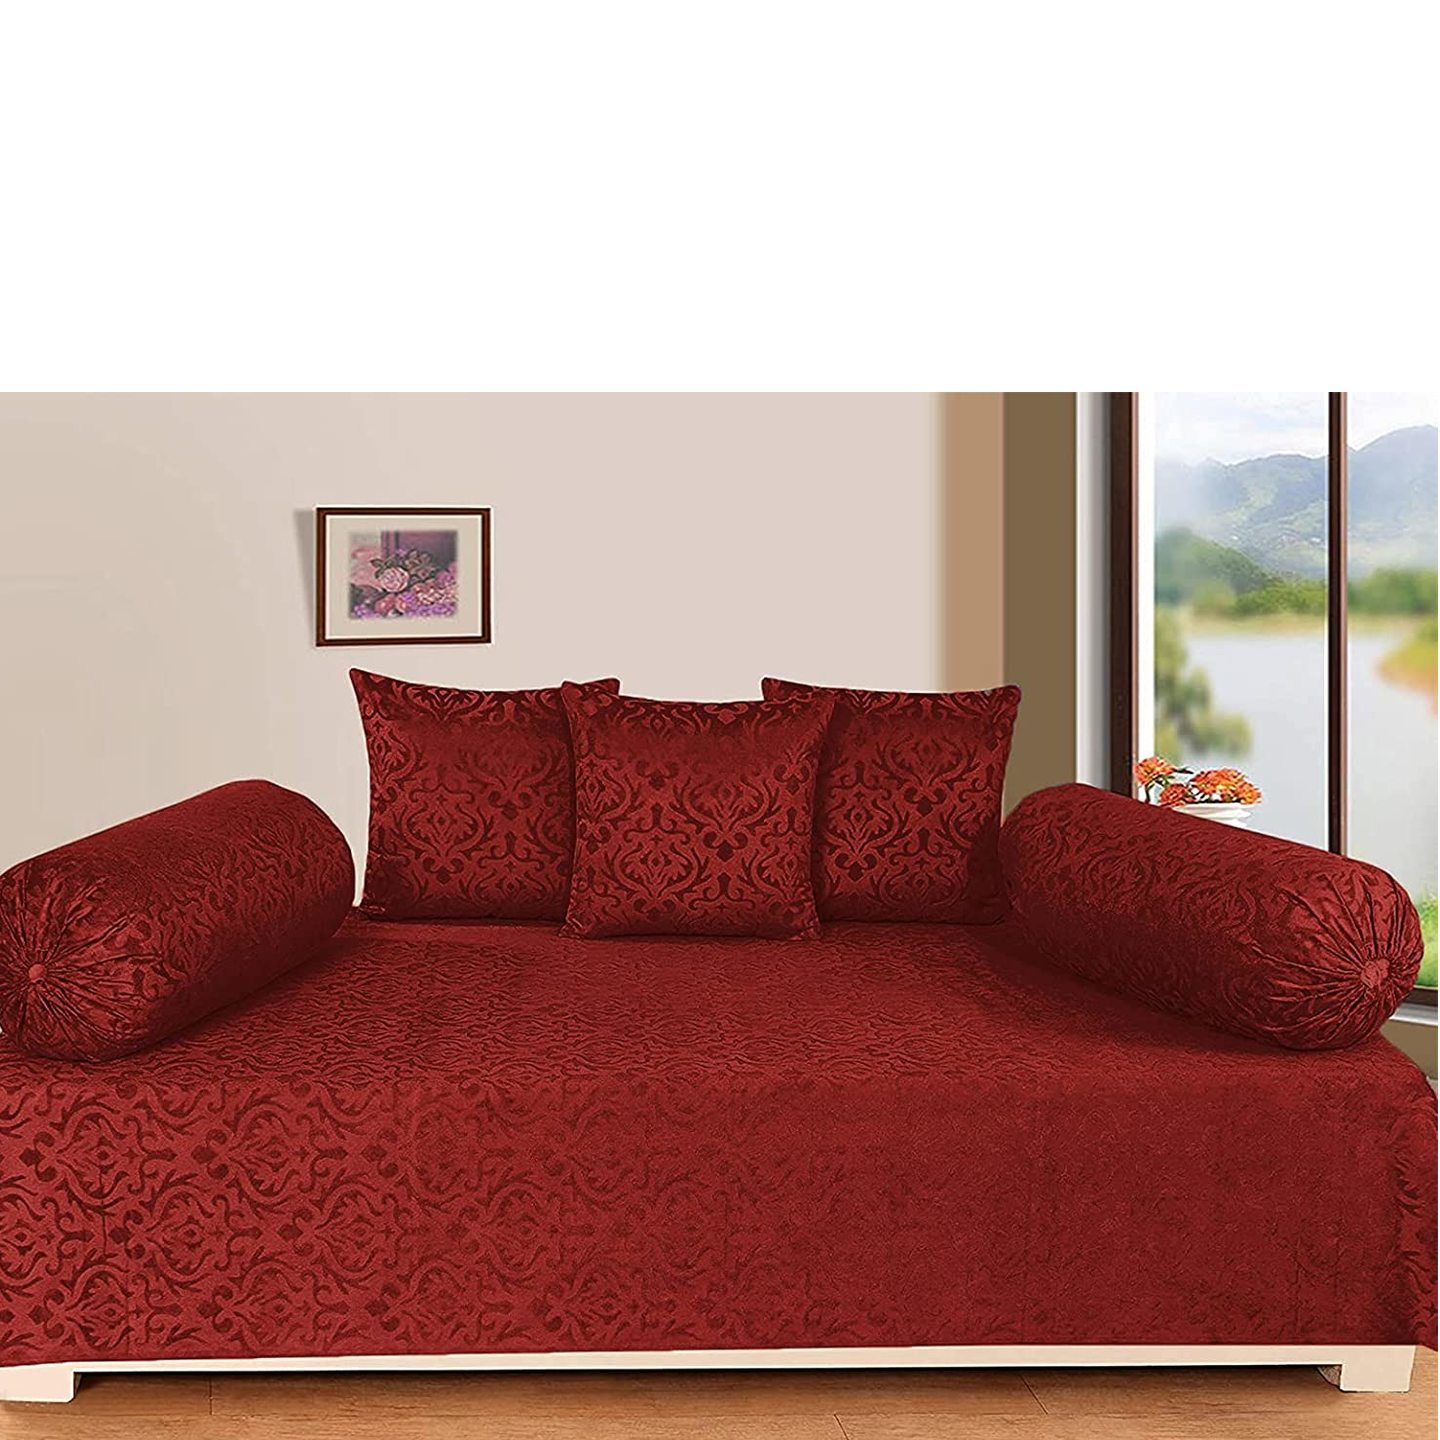 Handtex Home Premium Velvet Diwan Set of 6 Pieces -1 BedSheet, 2pc Bolster Cover with Dori and 3pc Cushion Covers Maroon Colour-6Pc Set